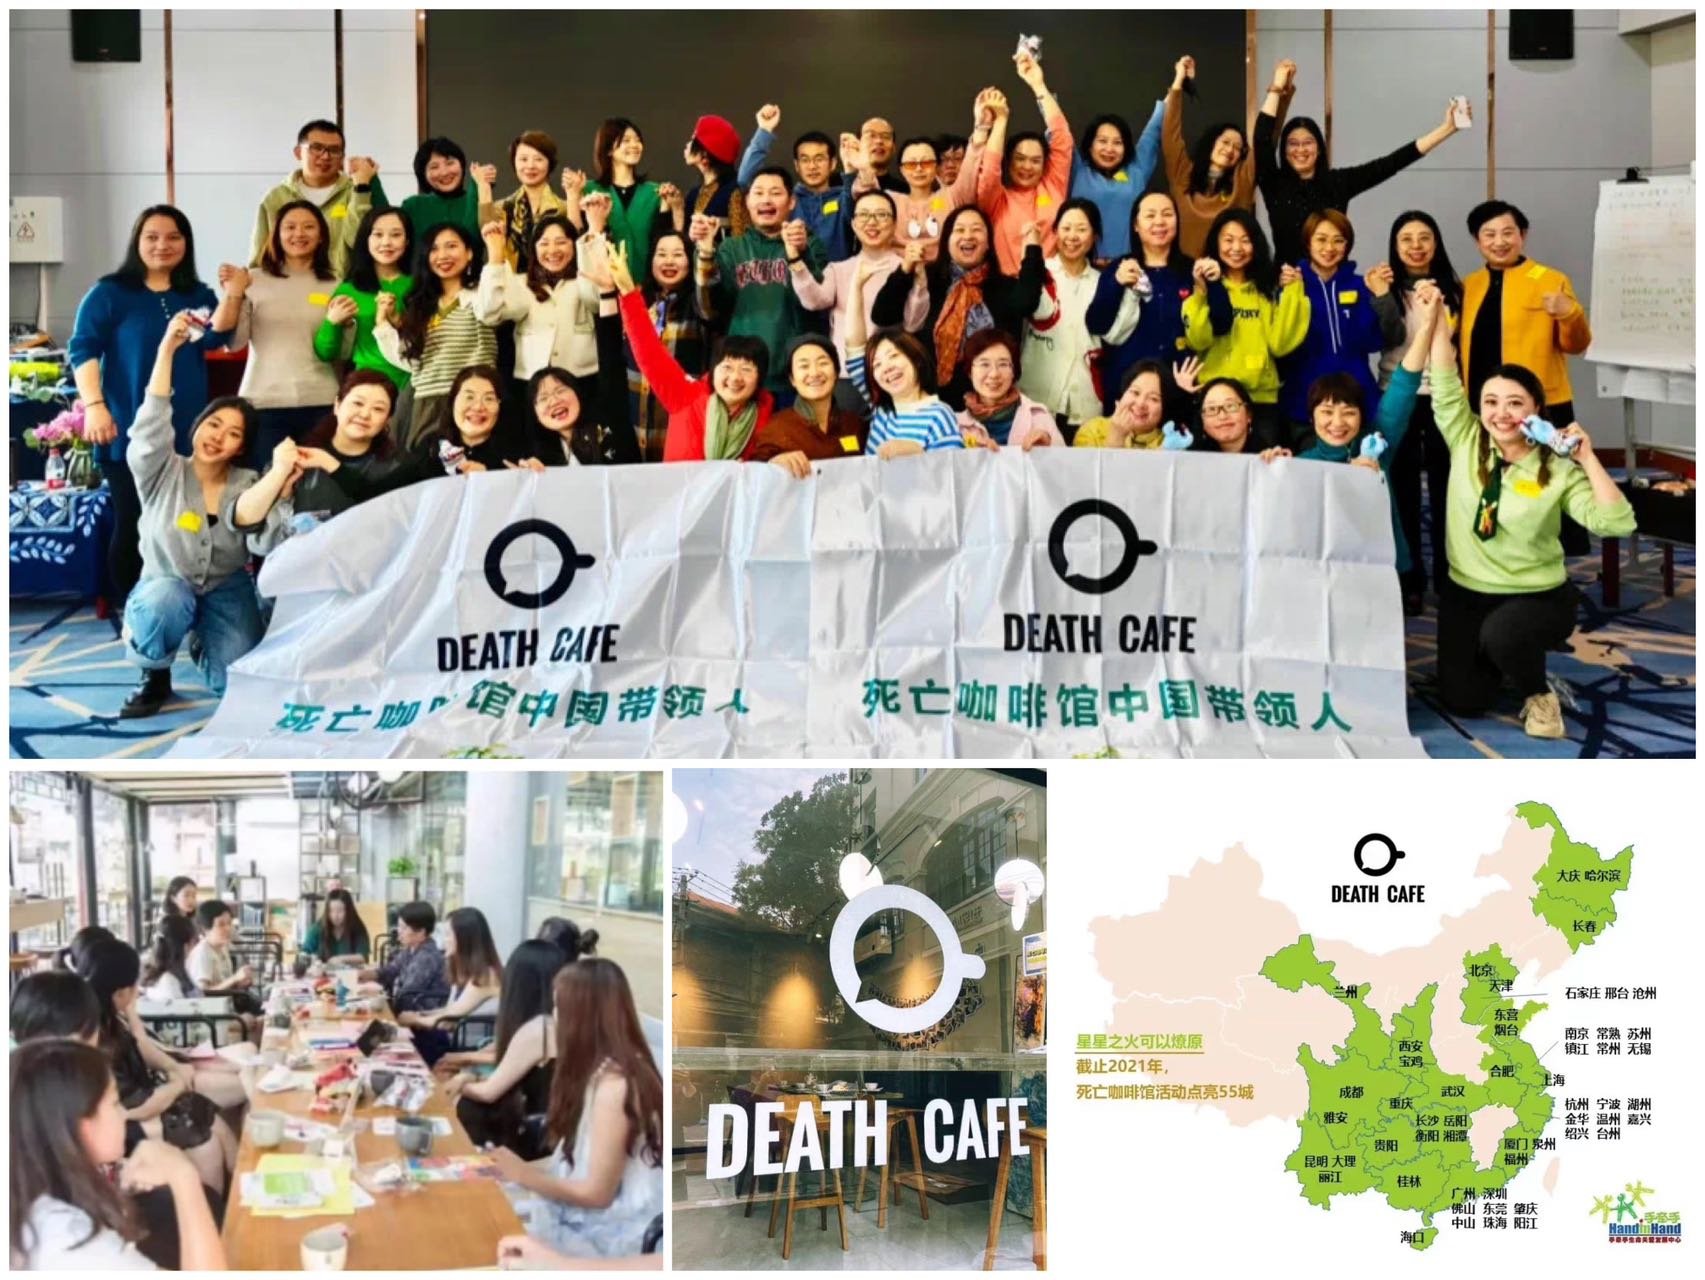 Zhou Yan: There are currently around 600 Death Café volunteers in 50 cities across China.